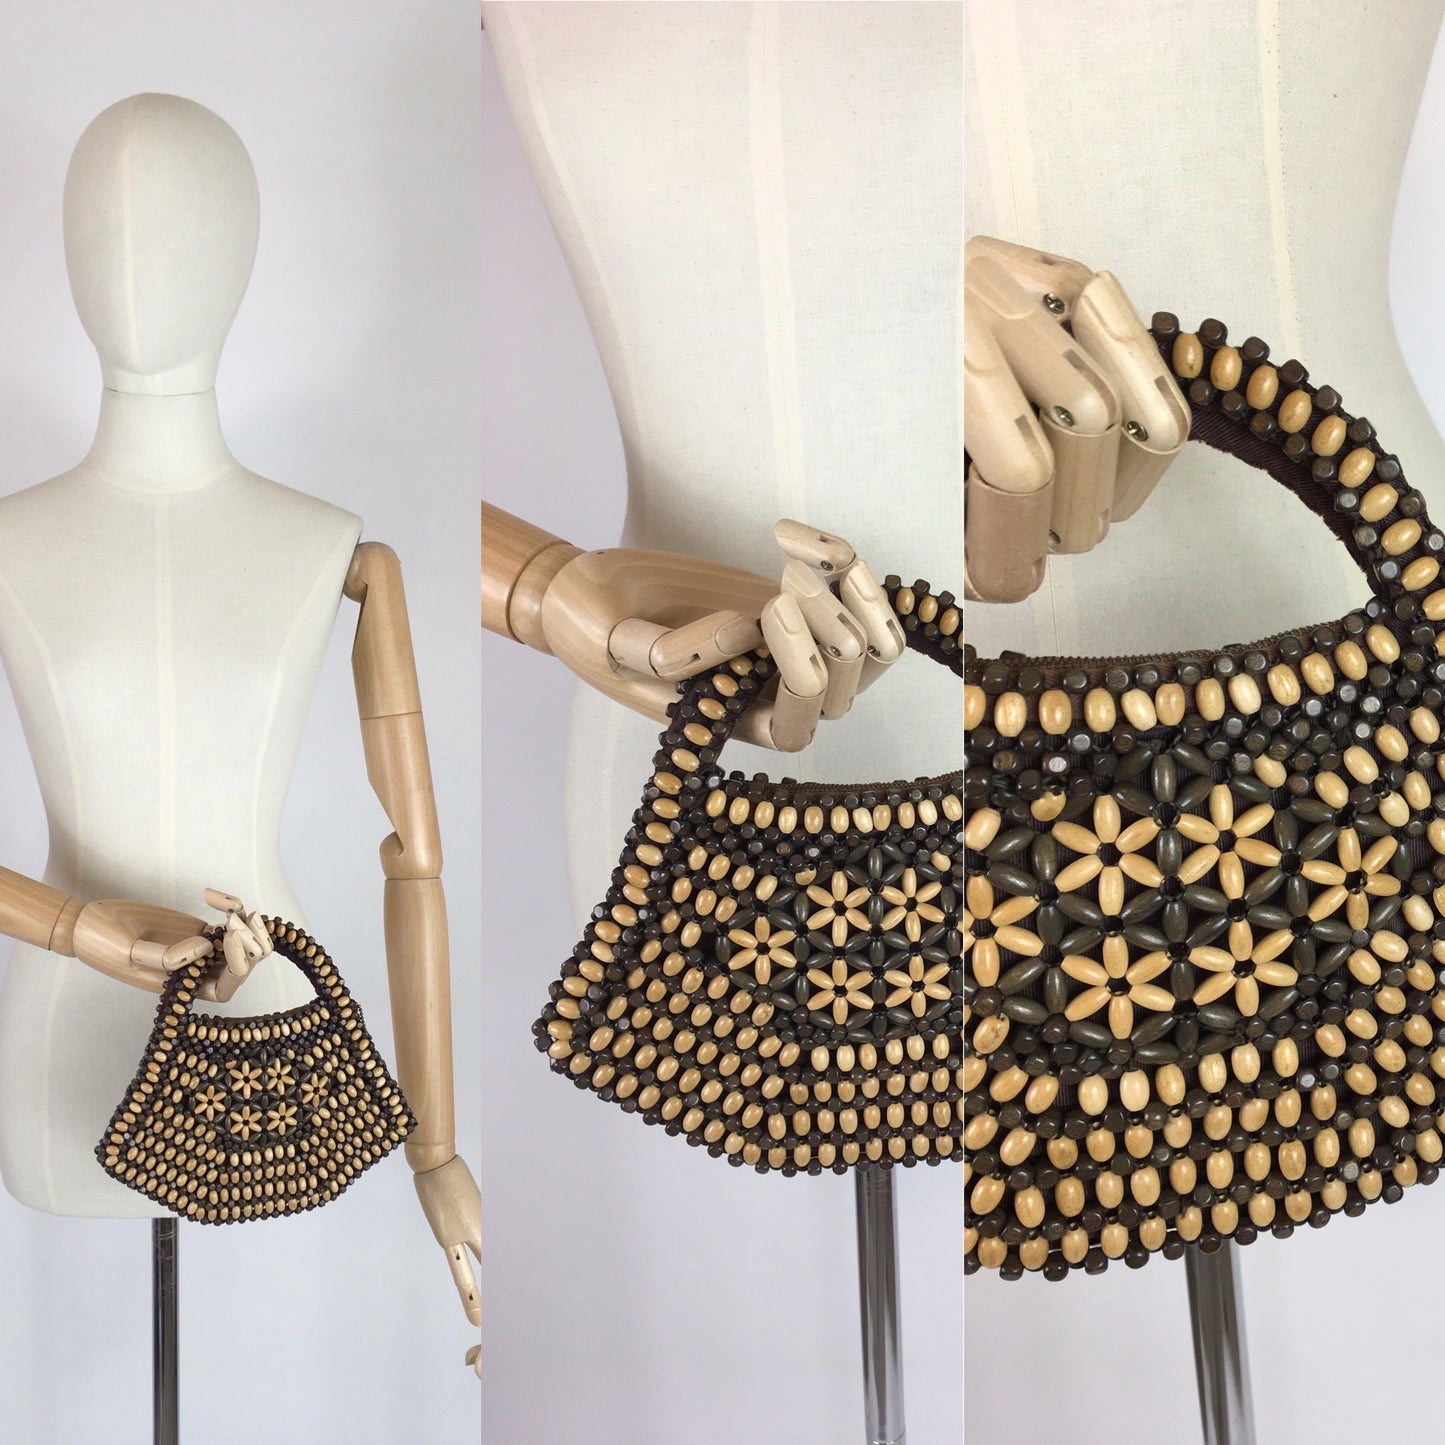 Original 1940’s Wooden Beaded Bag - In A Fabulous Shape with 2 tone beadwork